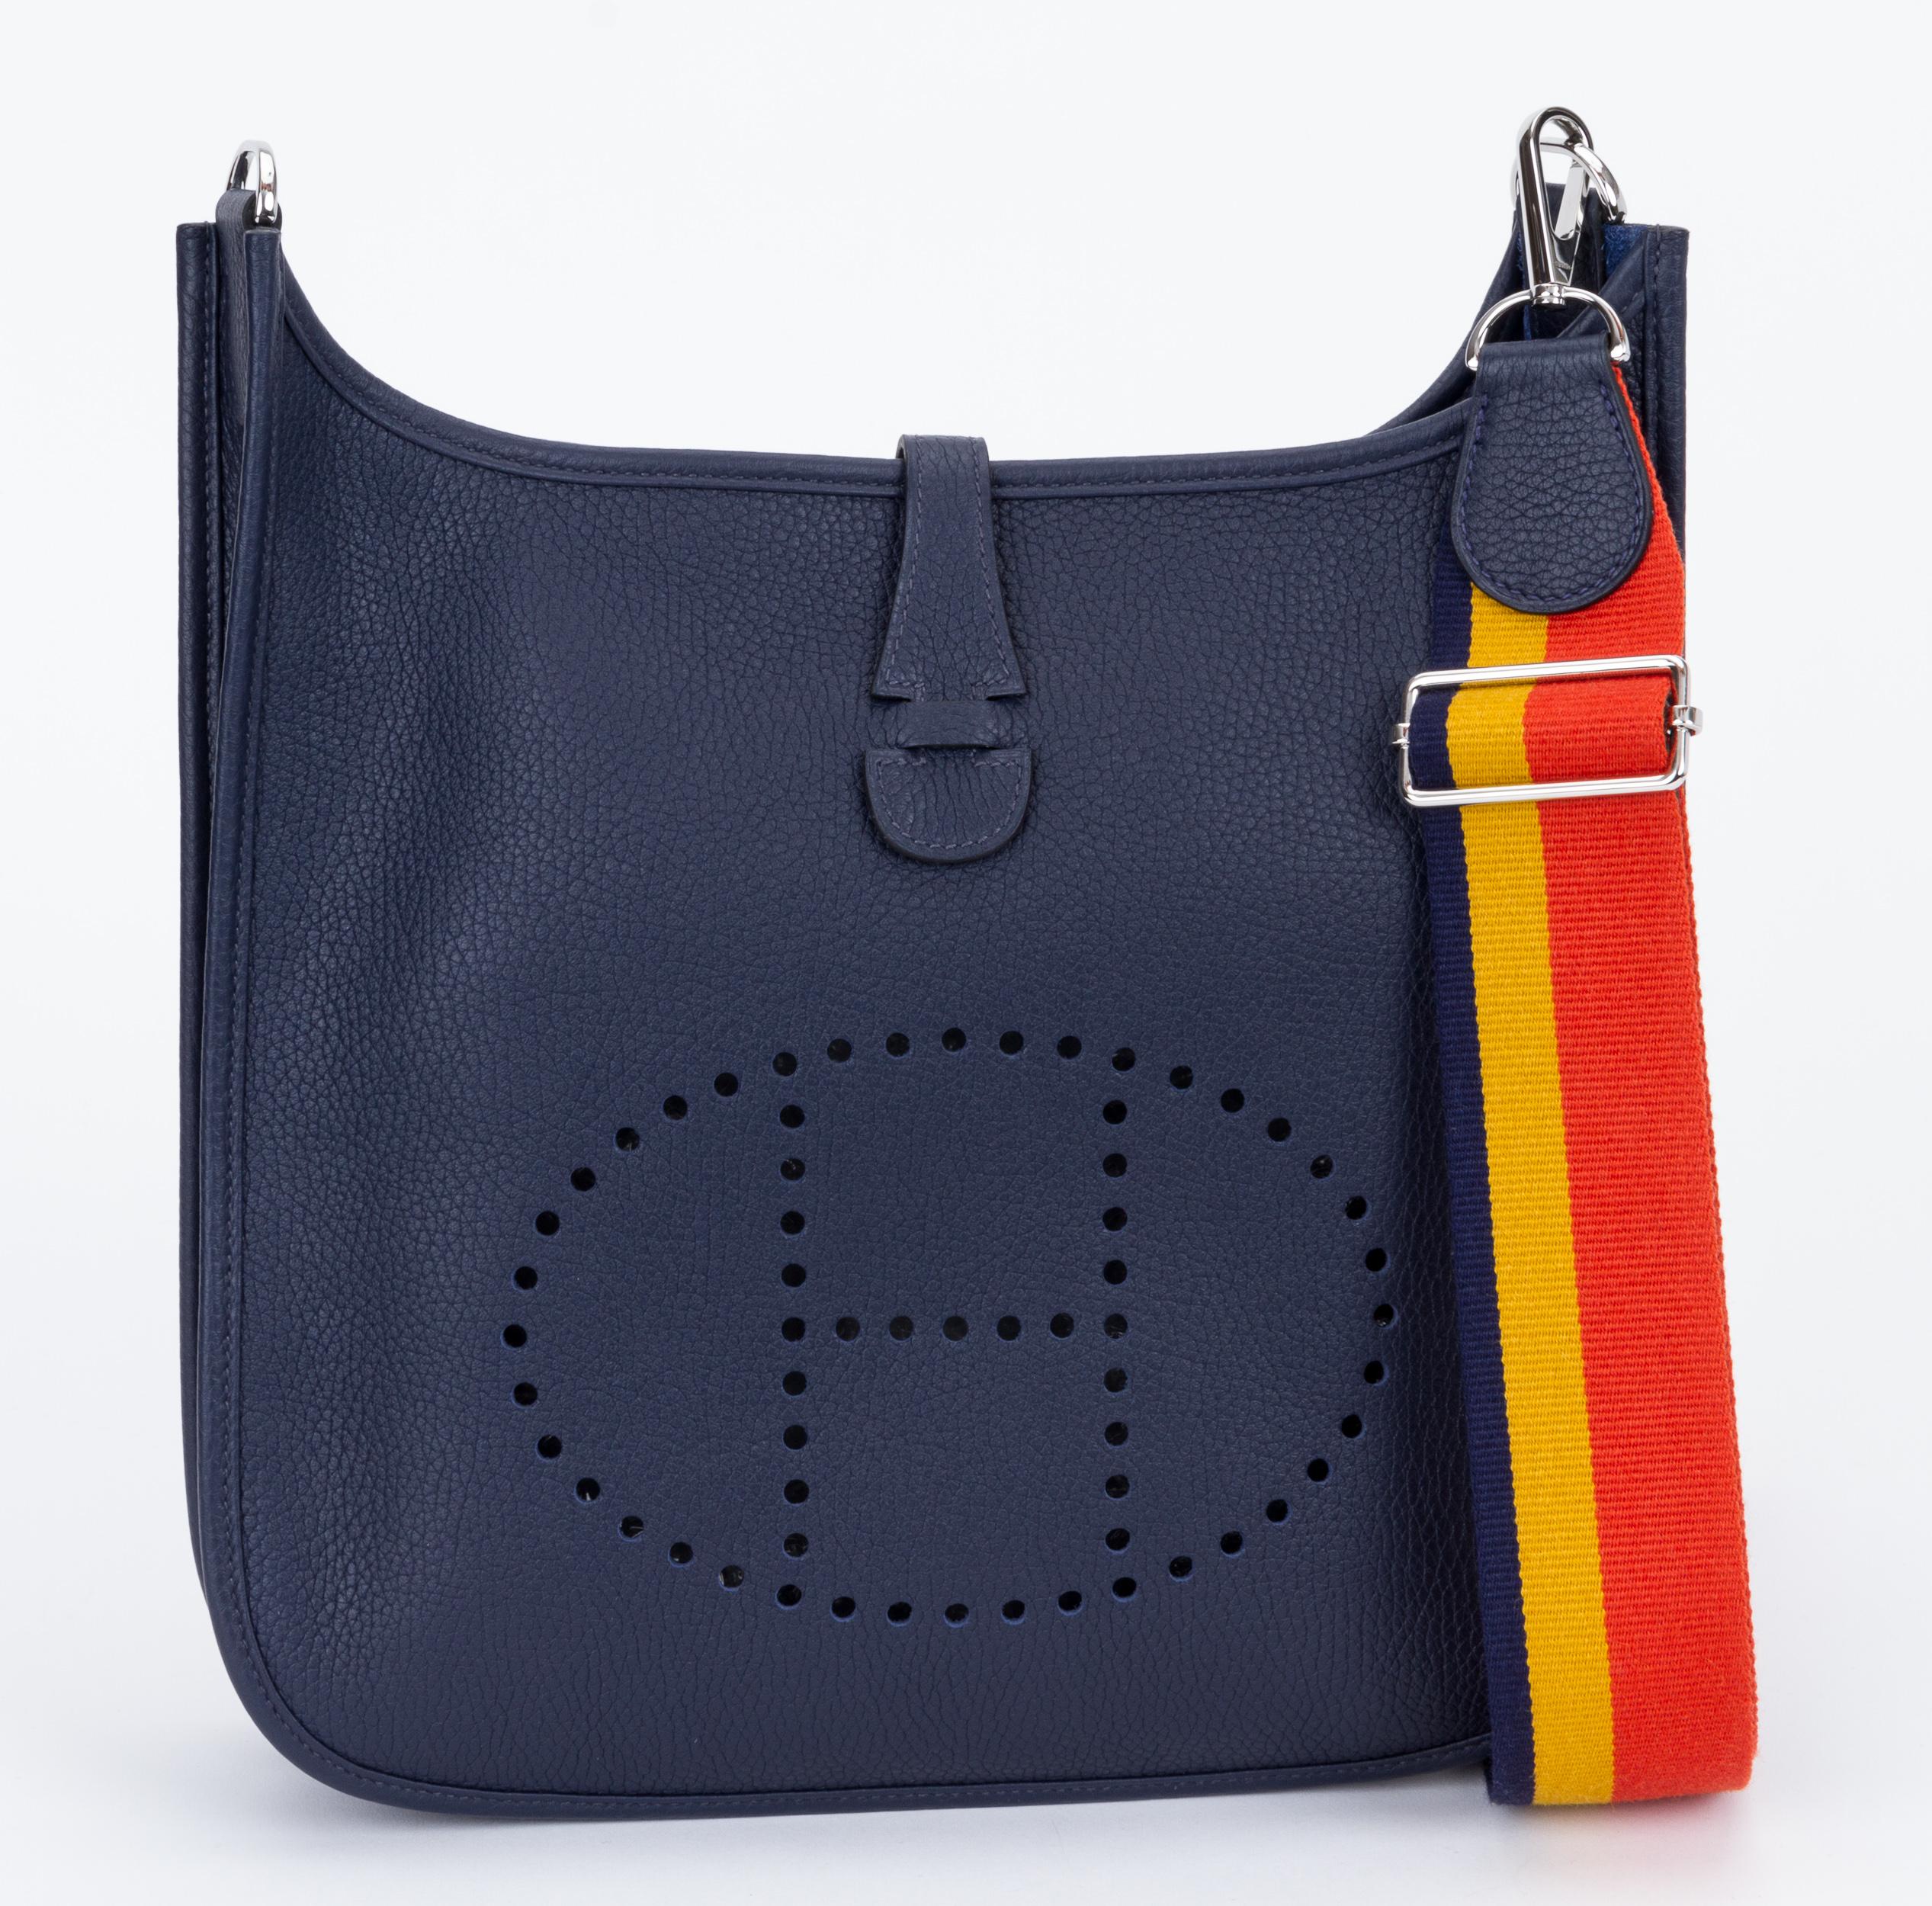 NEW rare Hermès blue nuit/blue marine clemence leather medium evelyne with palladium hardware. Adjustable multicolor shoulder strap, can be worn cross body. Date stamp C in a square, 2018. Comes with original duster, shoulder strap, box, ribbon.